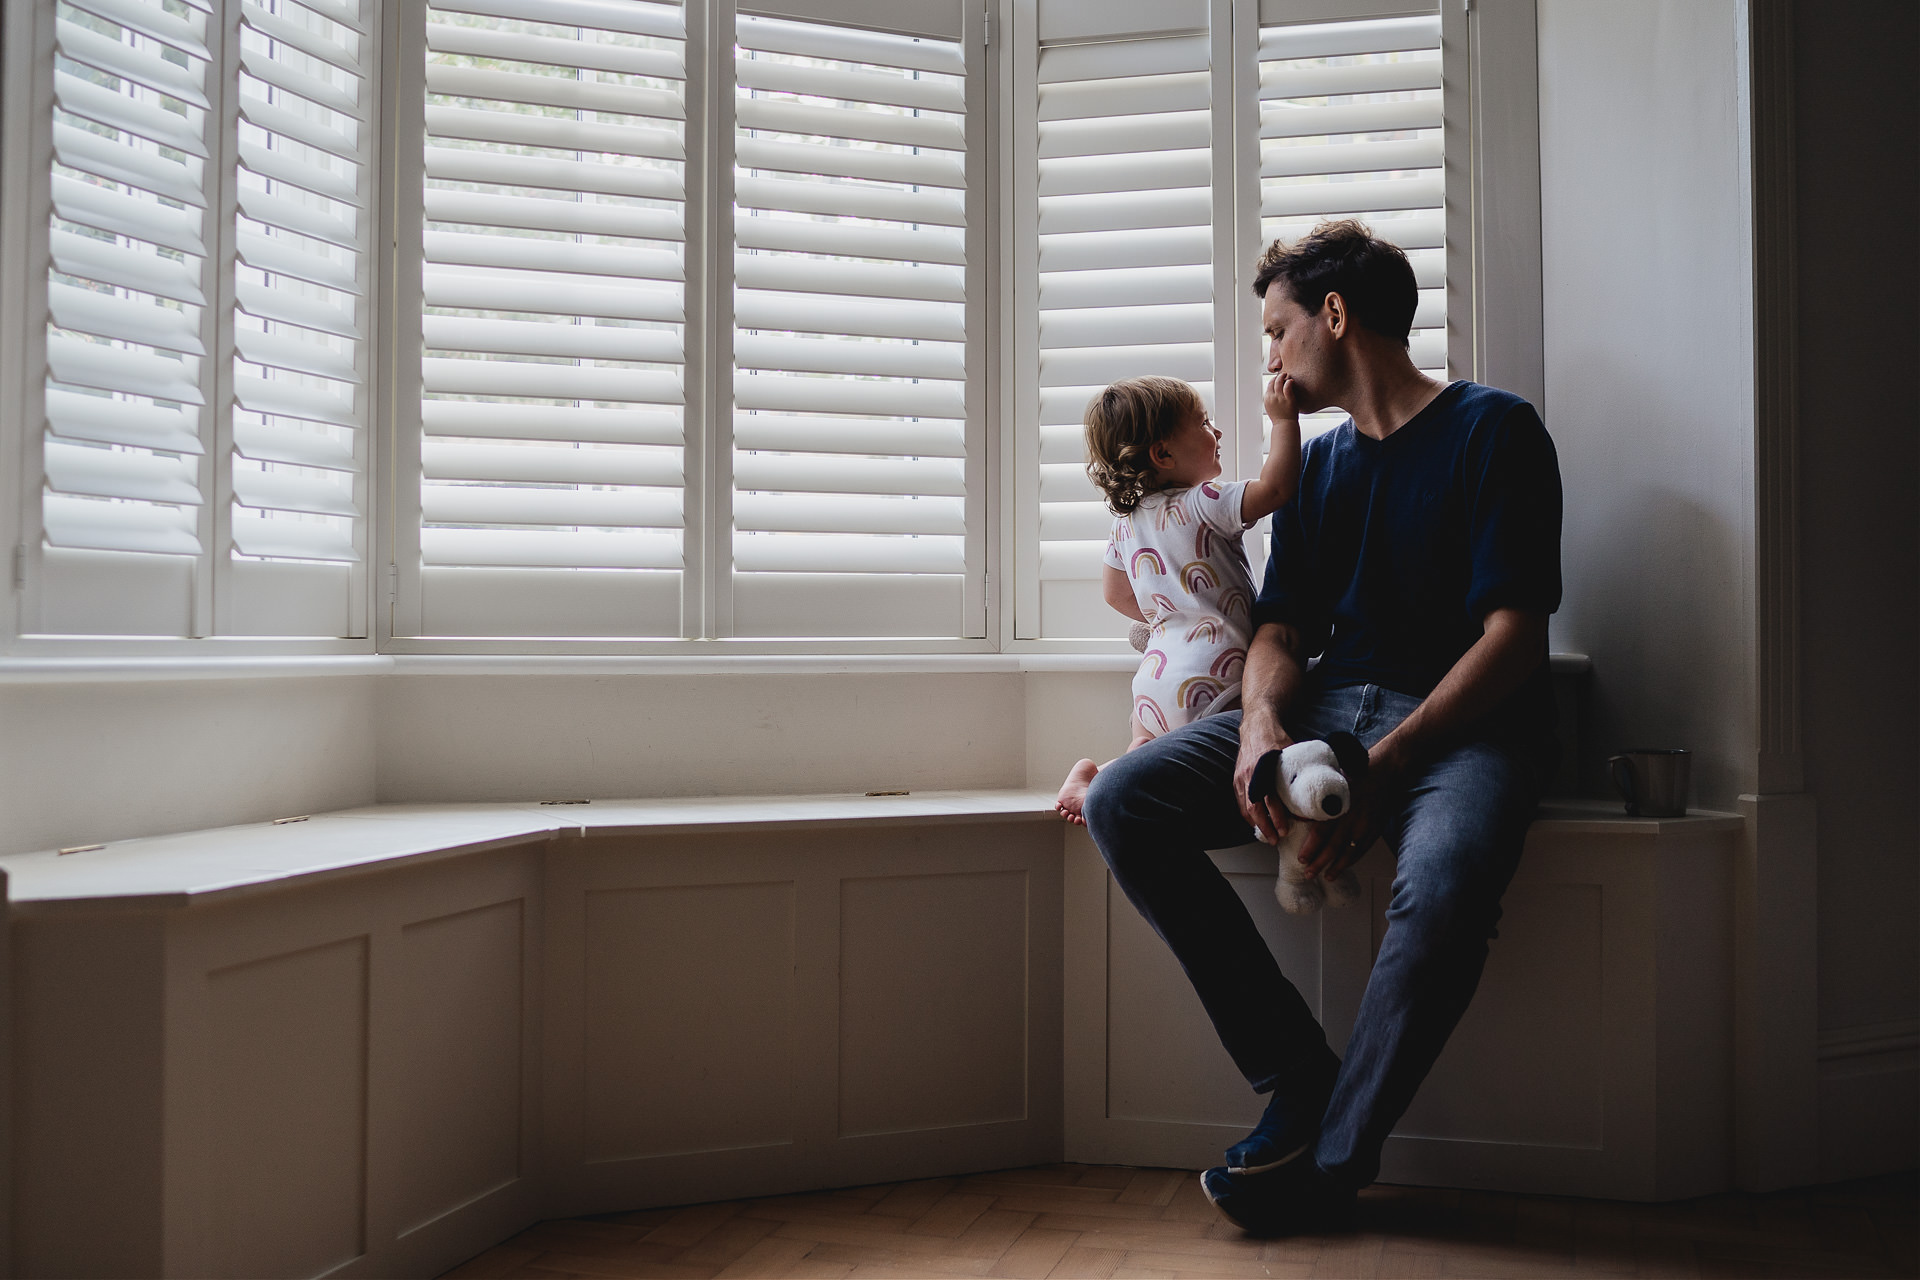 Somerset family photography of a father and toddler daughter sitting together on a window ledge